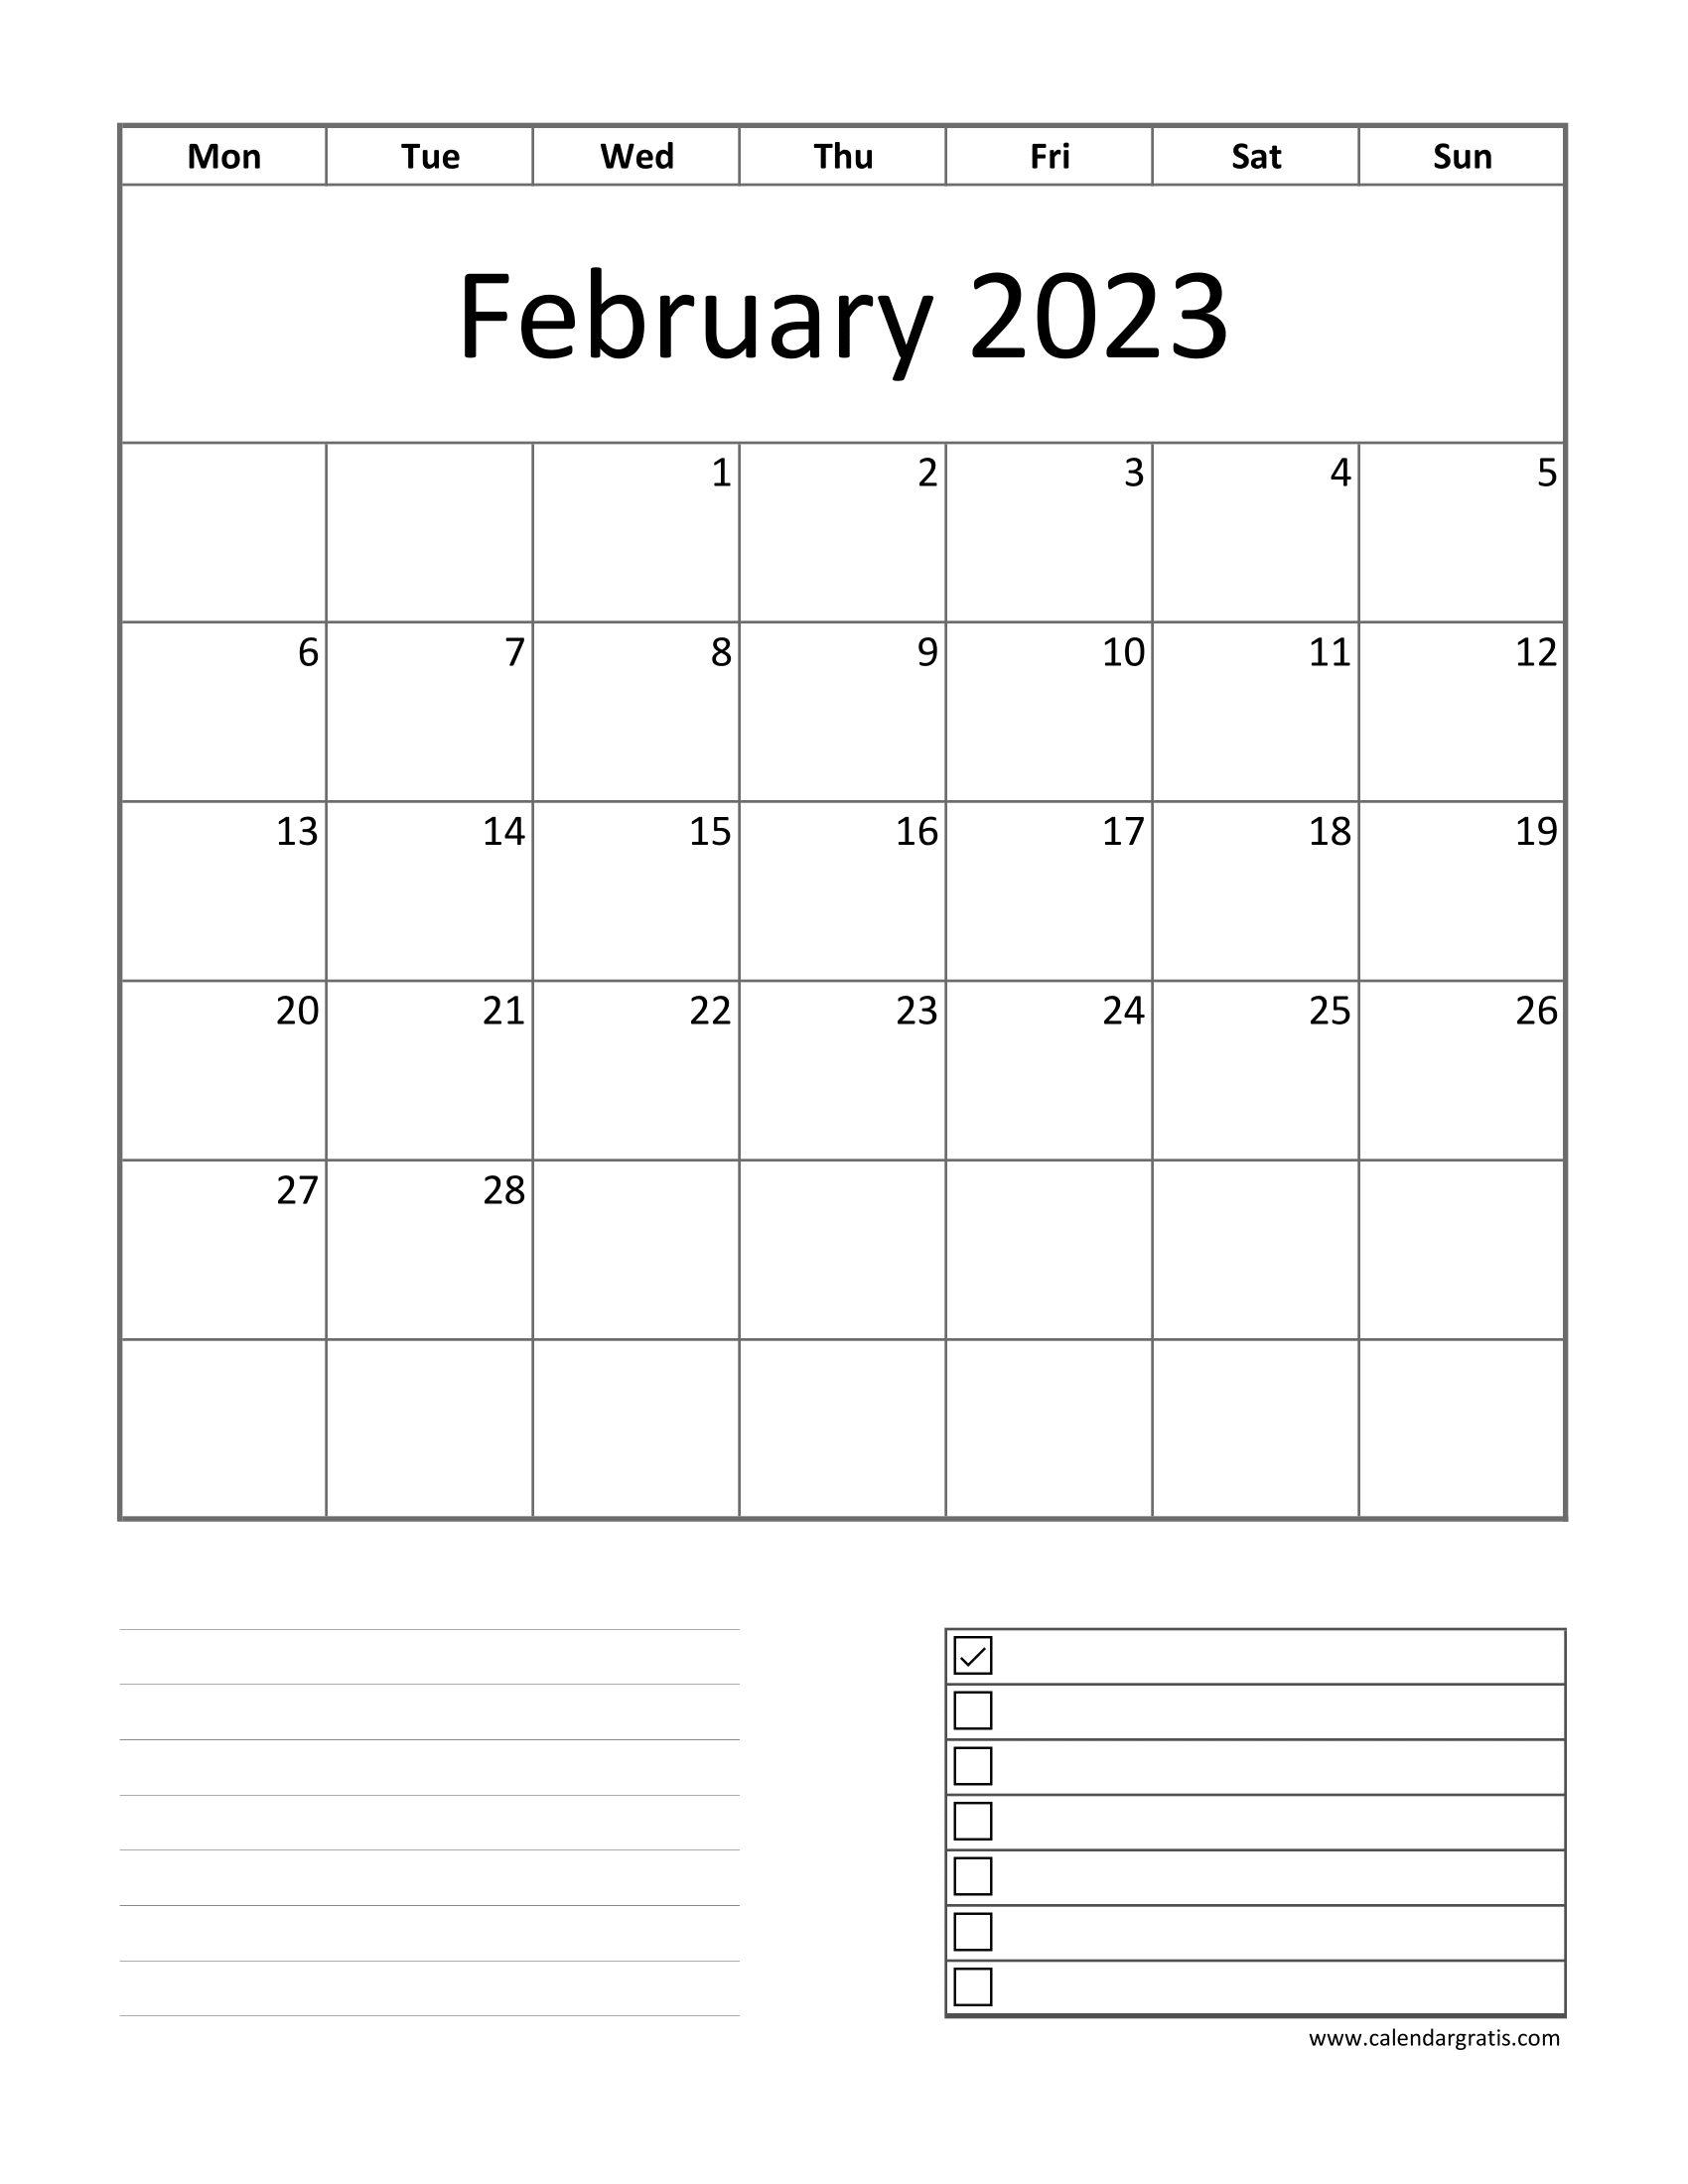 Printable Monday start calendar for February 2023 with notes and to-do list.